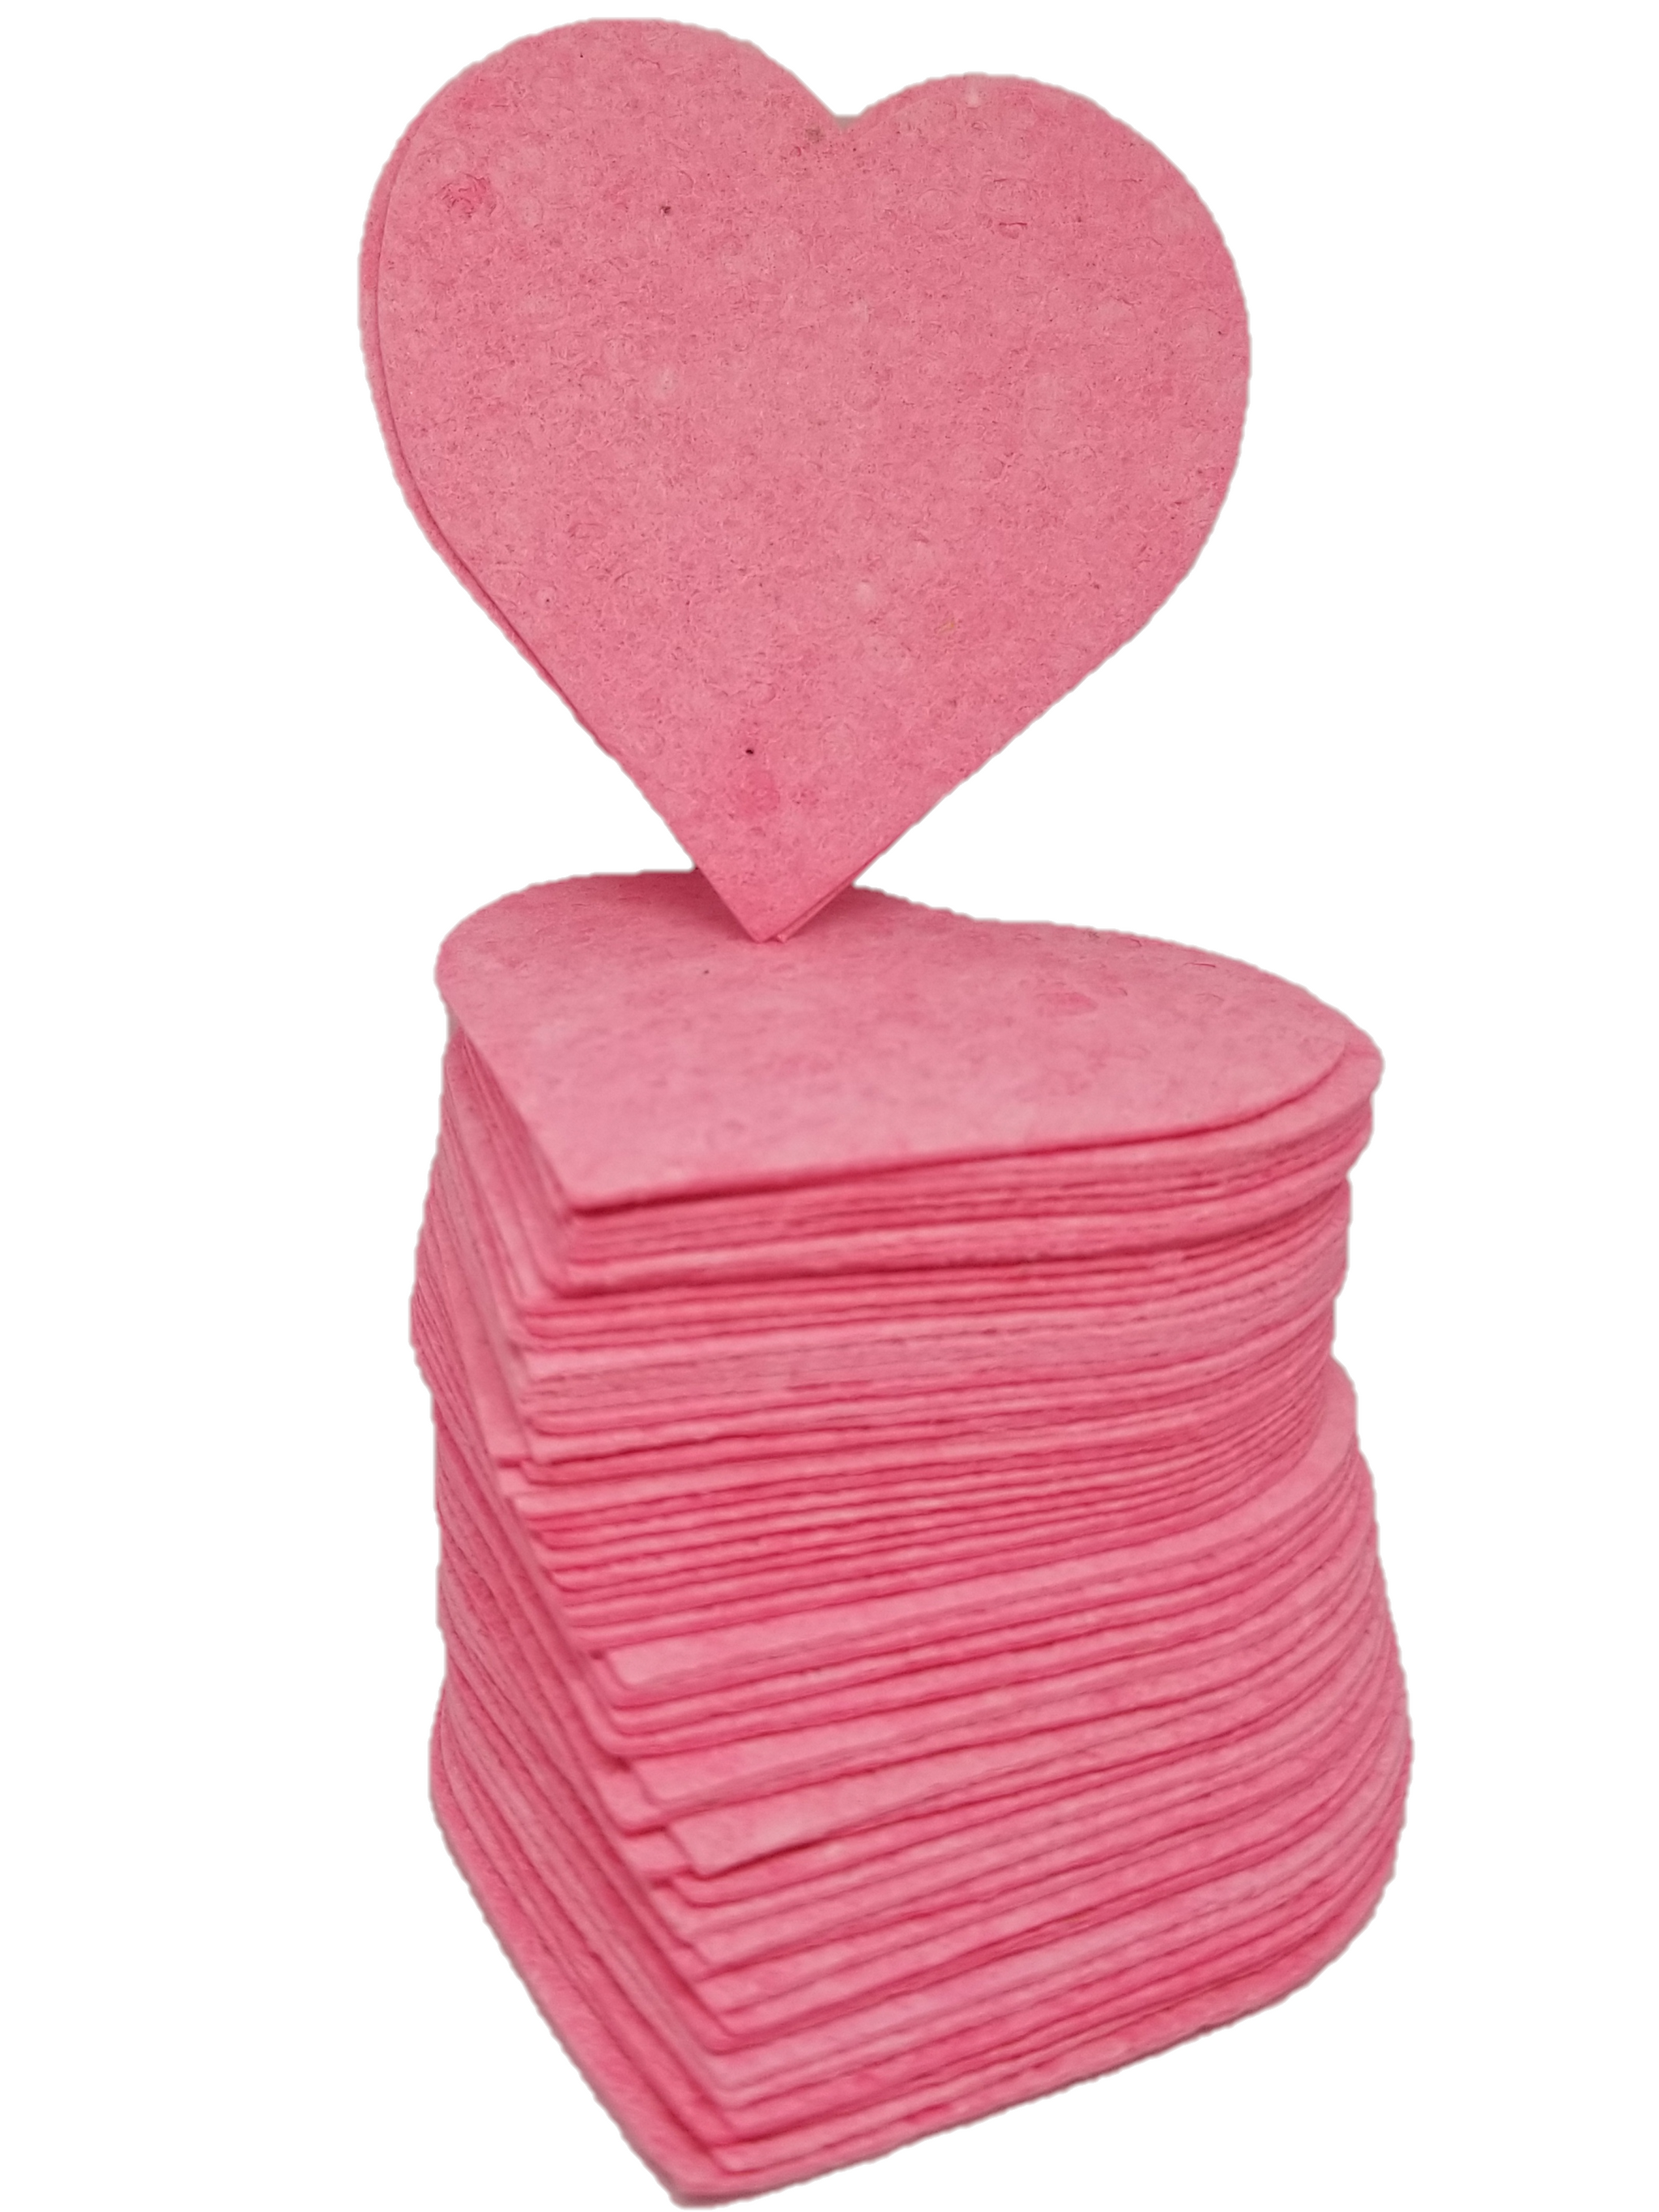 Pink Heart Facial sponges  Compressed Natural Cellulose Sponges - Rejuvv  by Fushay - Fushay Timeless Beauty